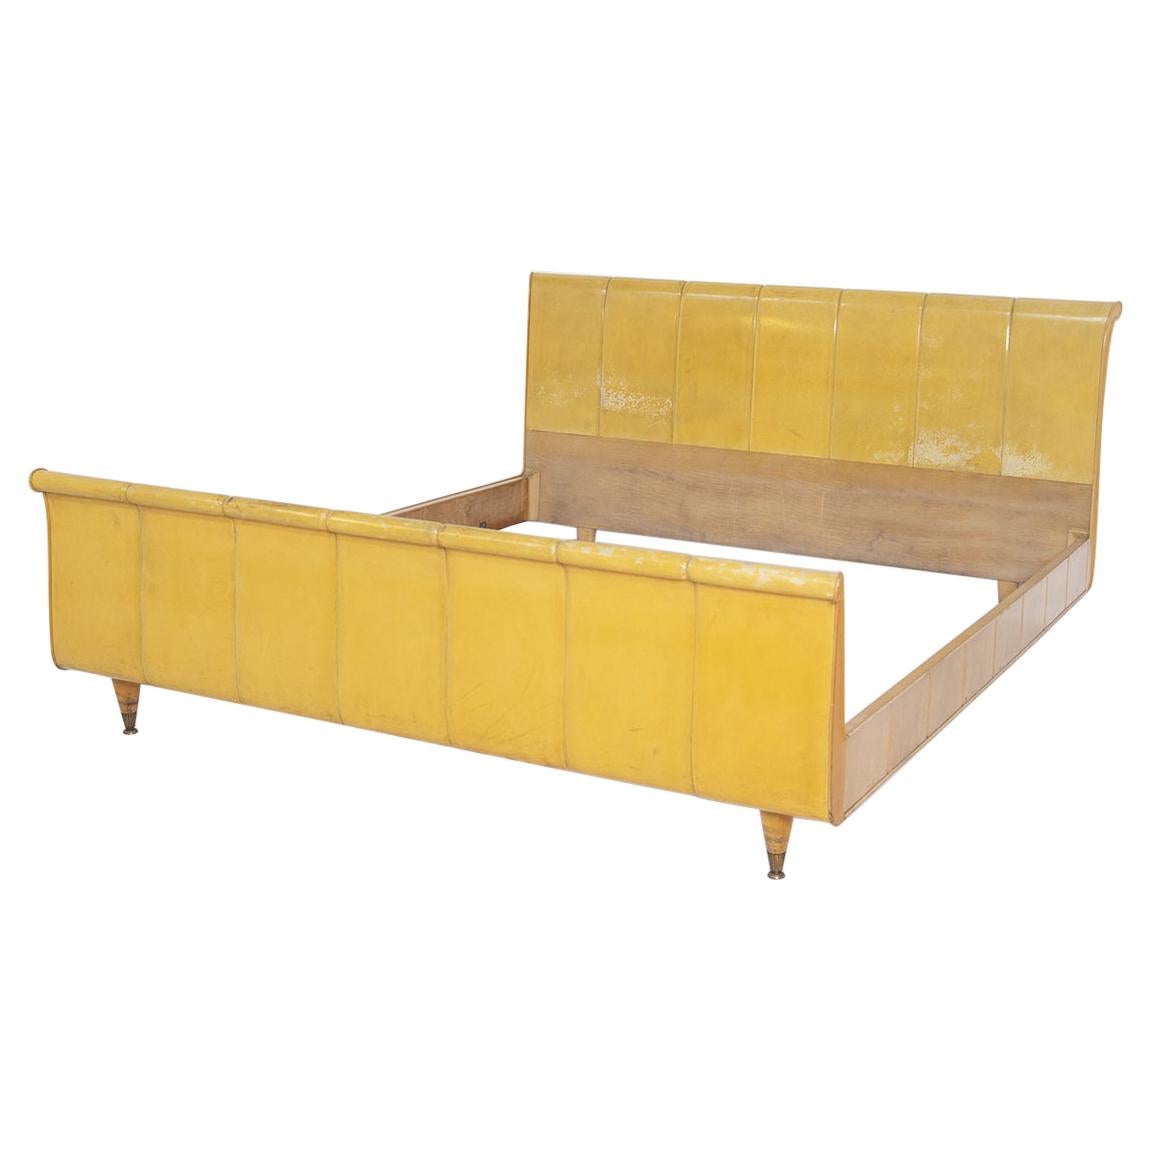 Luxurious Italian Bed in Yellow Parchment, Wood and Brass